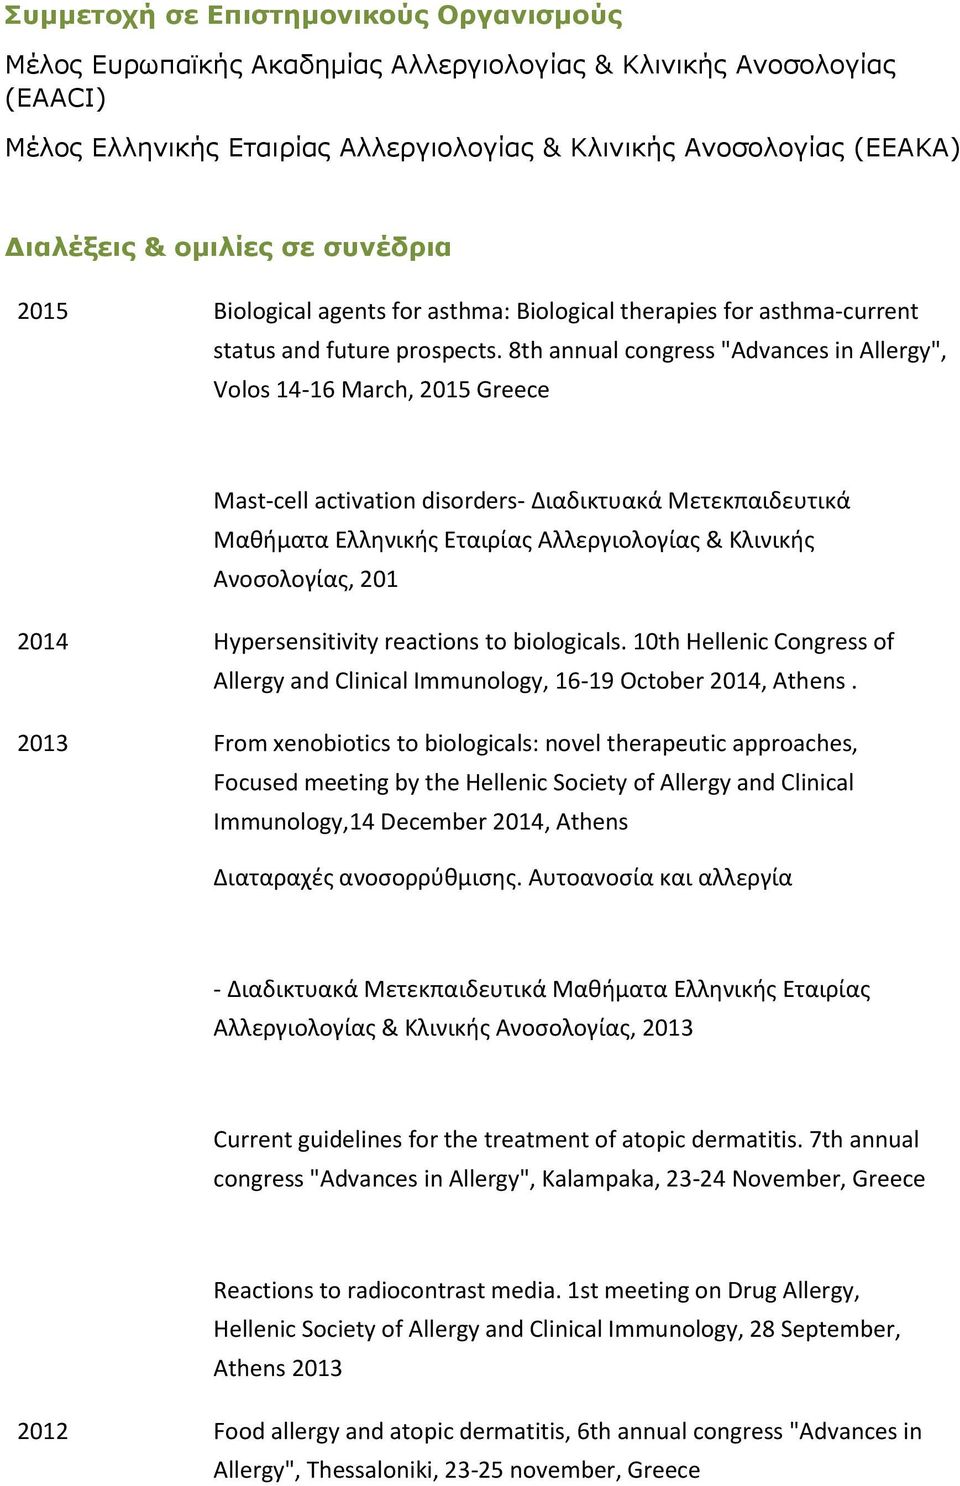 8th annual congress "Advances in Allergy", Volos 14-16 March, 2015 Greece Mast-cell activation disorders- Διαδικτυακά Μετεκπαιδευτικά Μαθήματα Ελληνικής Εταιρίας Αλλεργιολογίας & Κλινικής